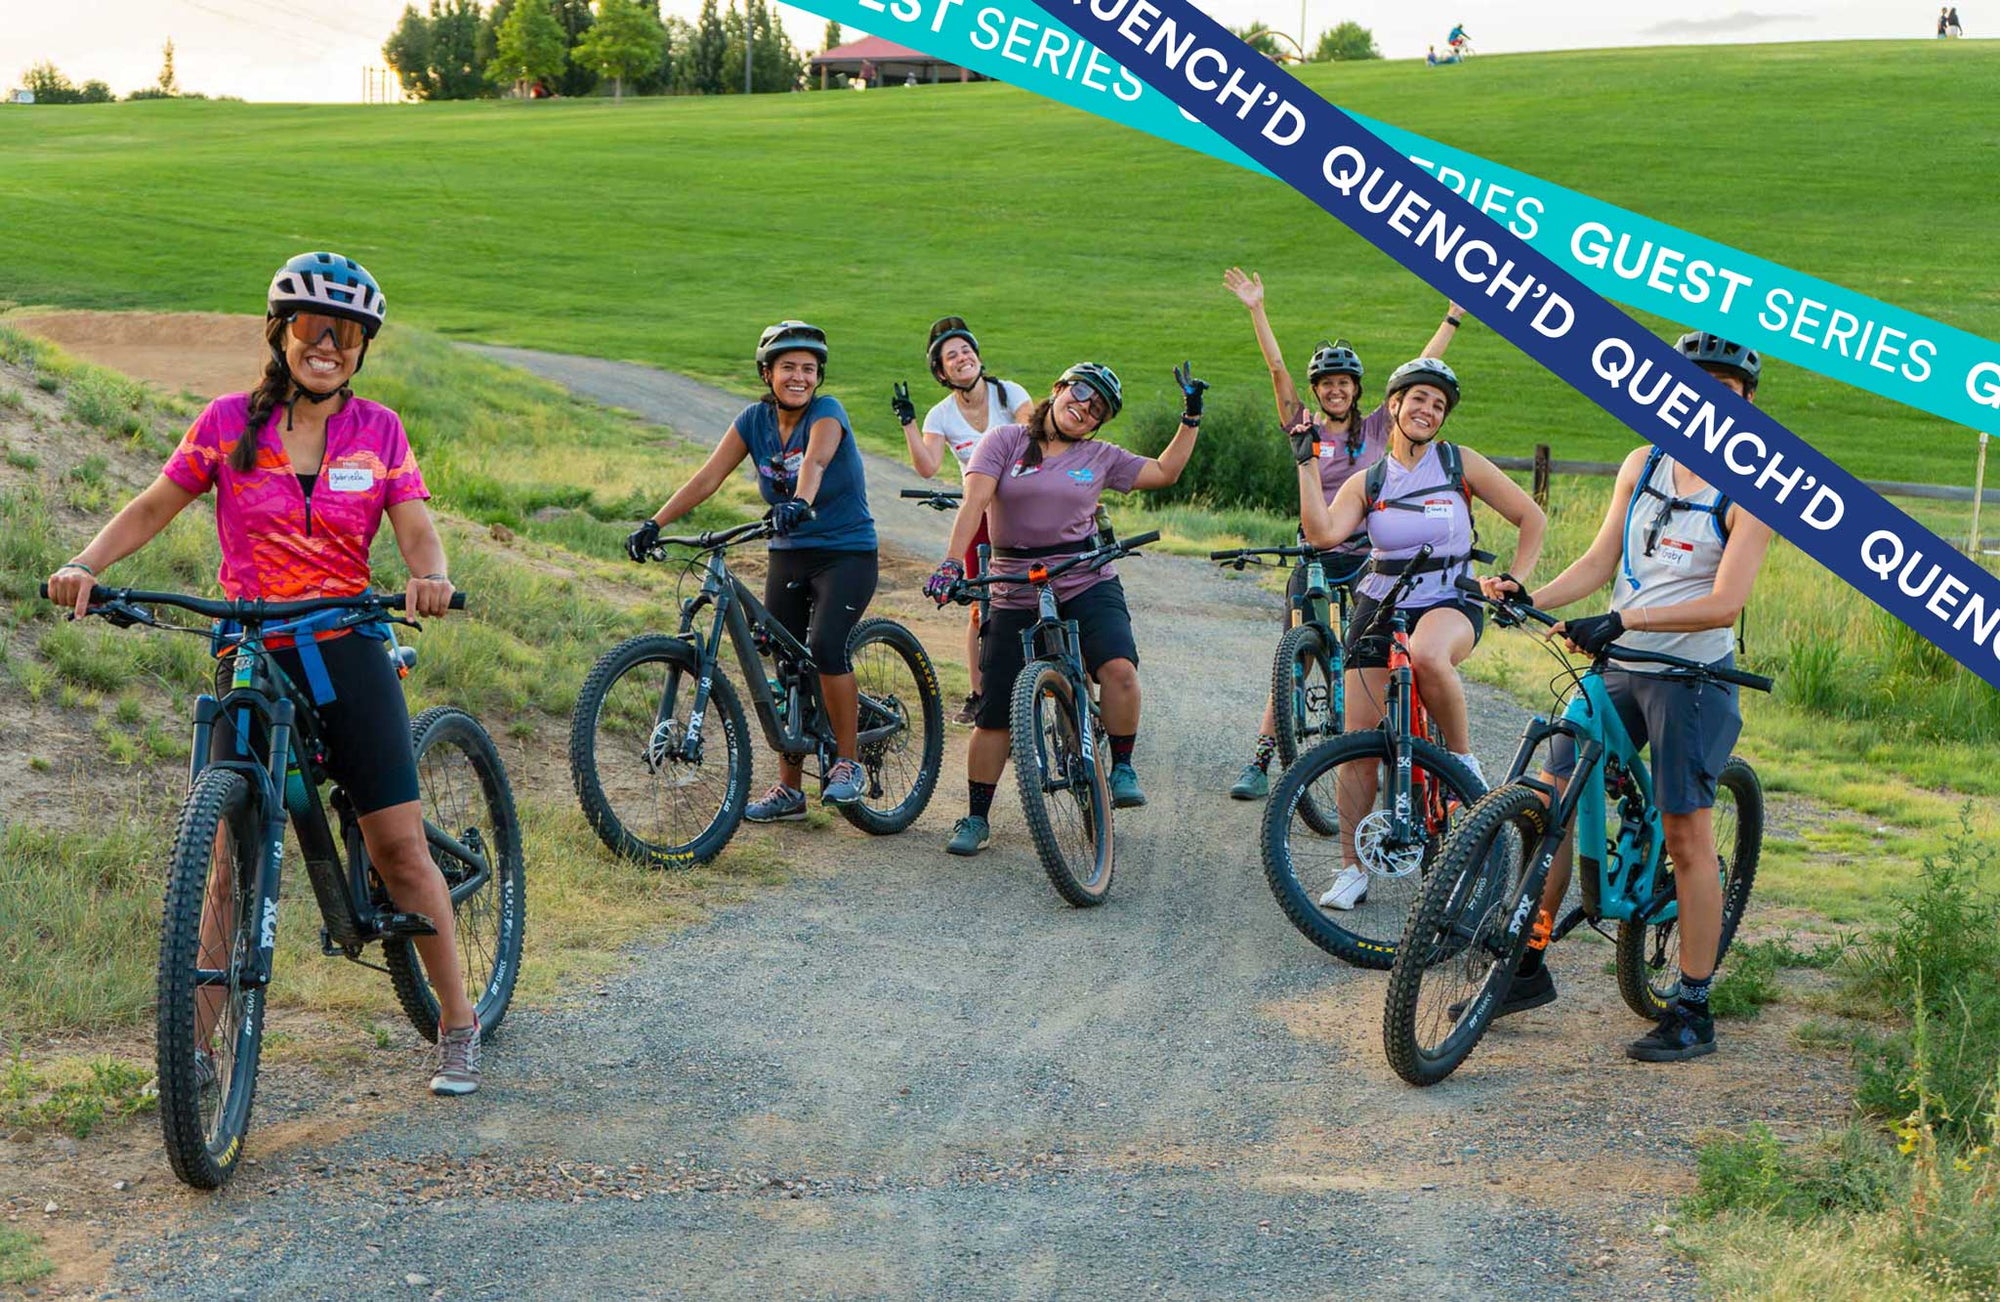 Quench'd: The Power of Mountain Bike Clinics